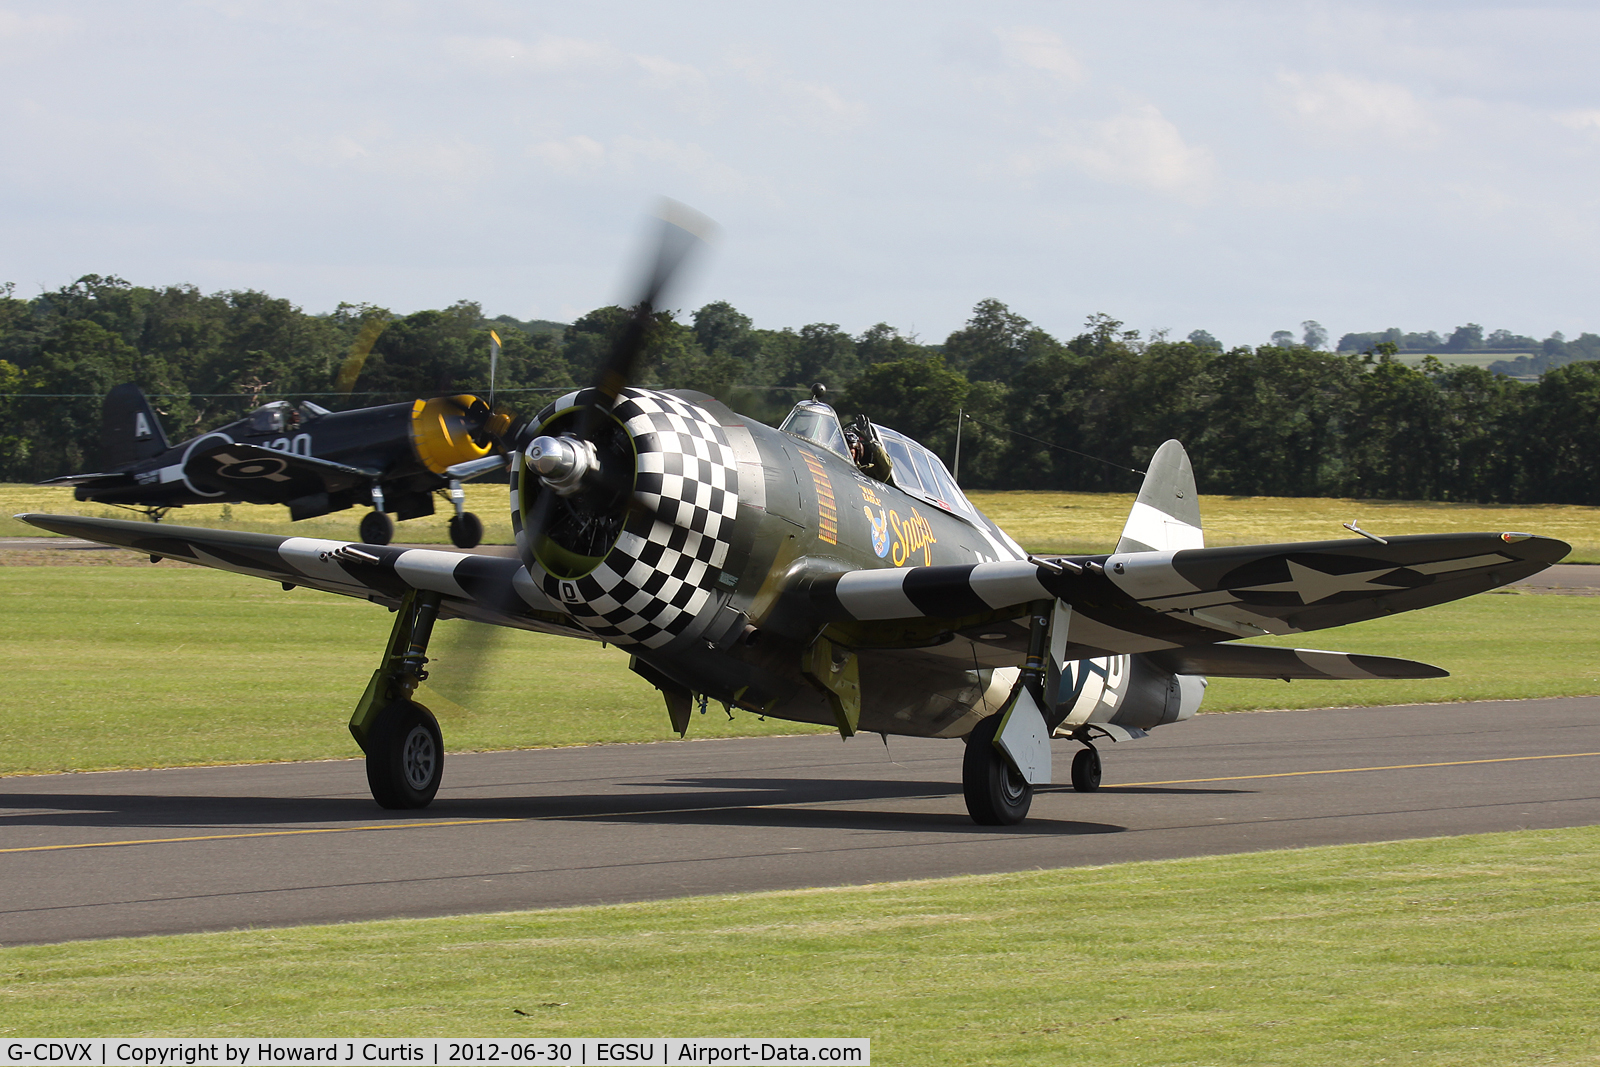 G-CDVX, 1942 Curtiss P-47G Thunderbolt C/N 21953, At Flying Legends 2012. Taxiing back after the final display.